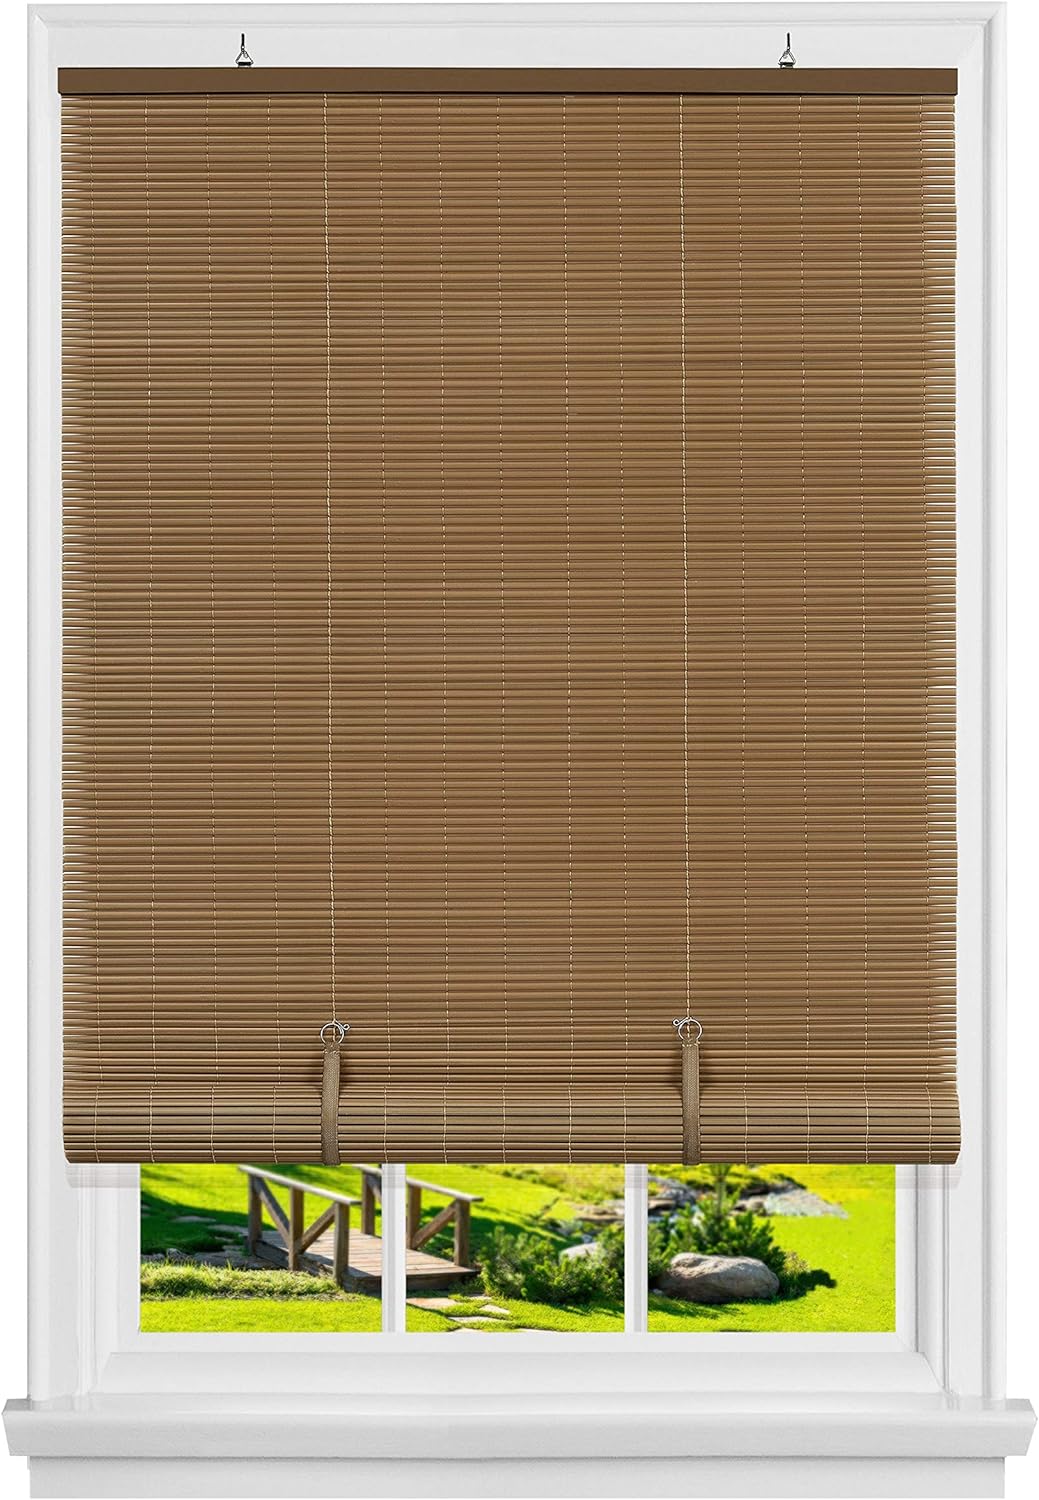 LIVE LIFE PRODUCTS Eclipse Cordless Vinyl Roll-Up Blind 48x72 - Woodtone